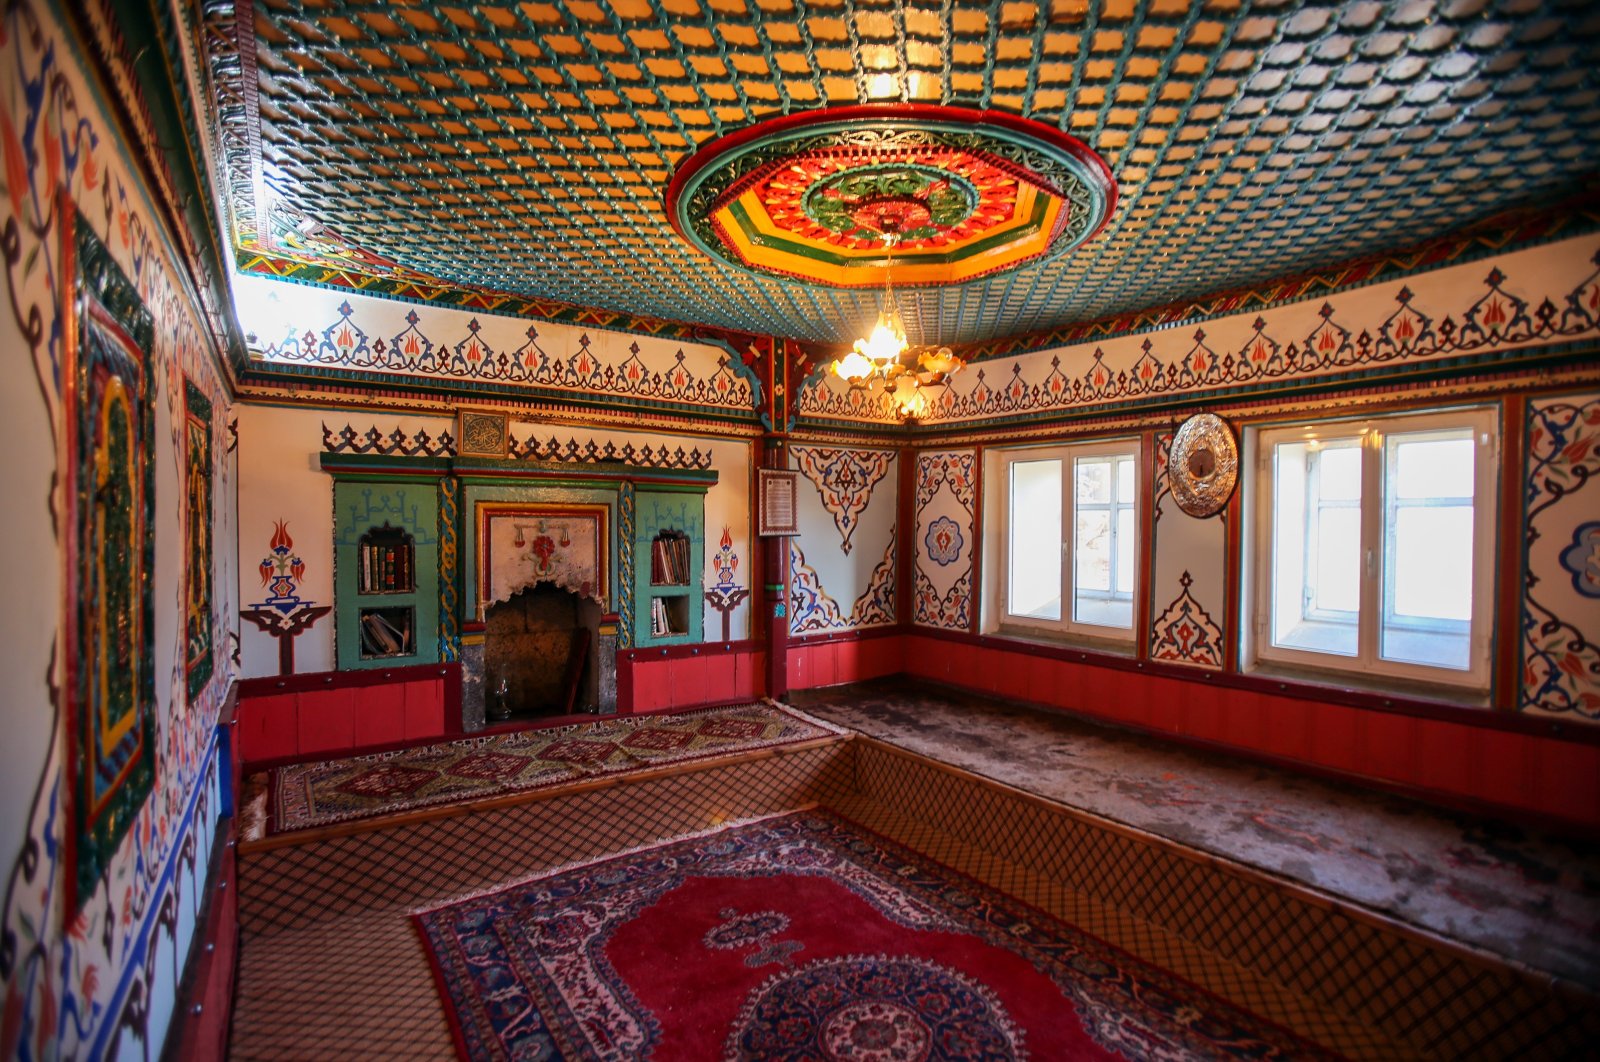 The ornate rooms are the places where social life continues in the village. (İHA Photo)